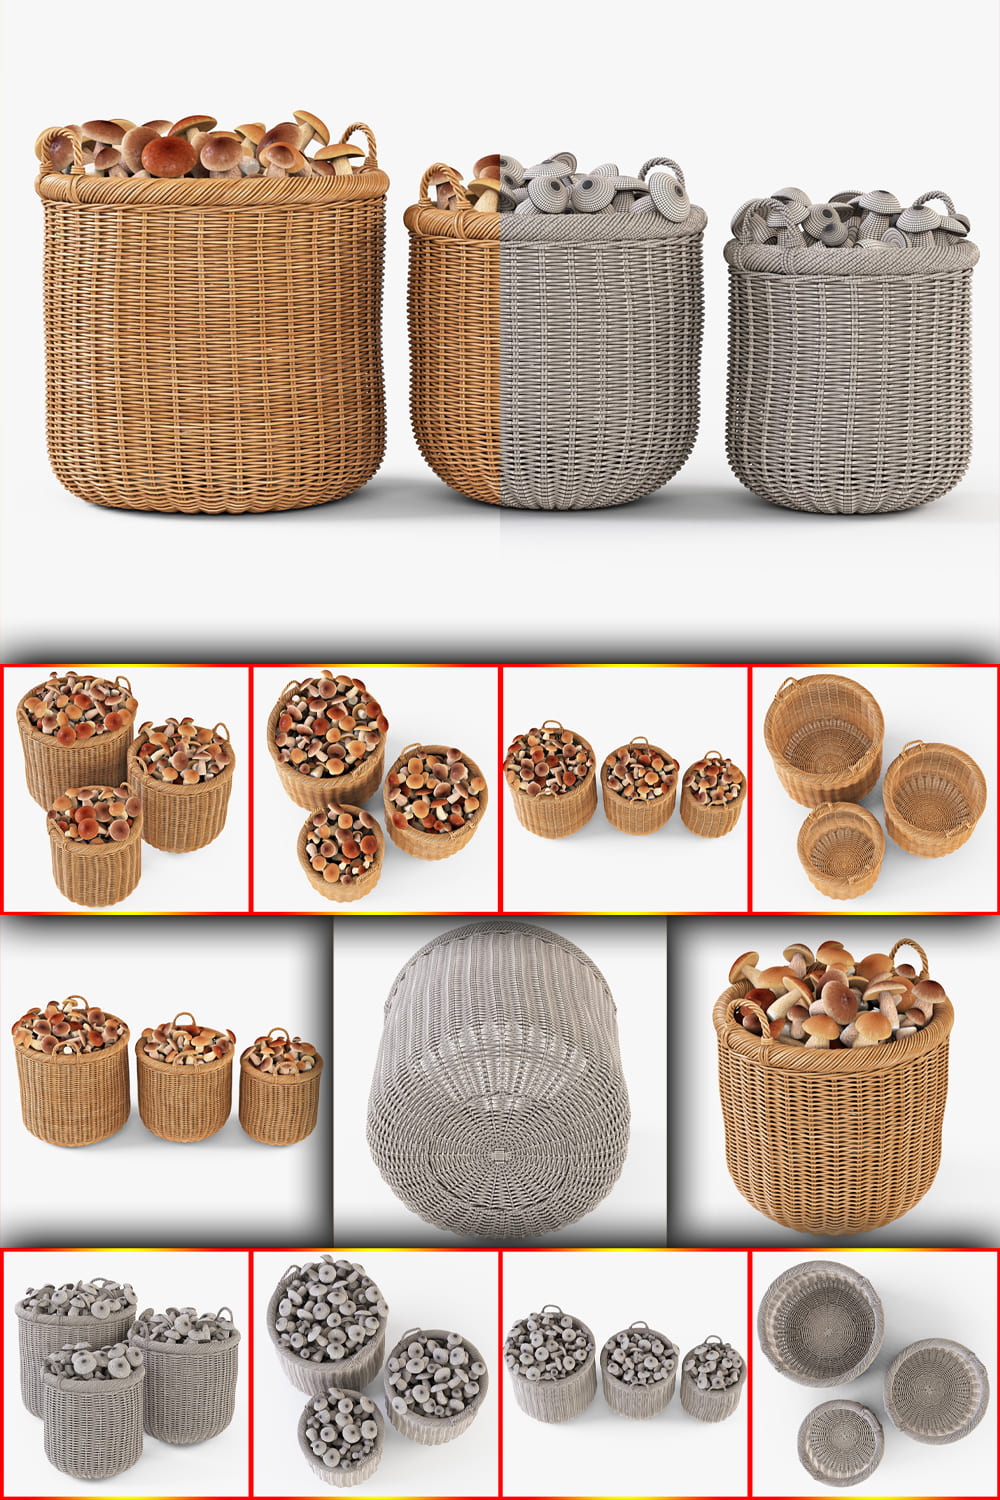 Small and large pictures with 3D models of baskets with mushrooms.